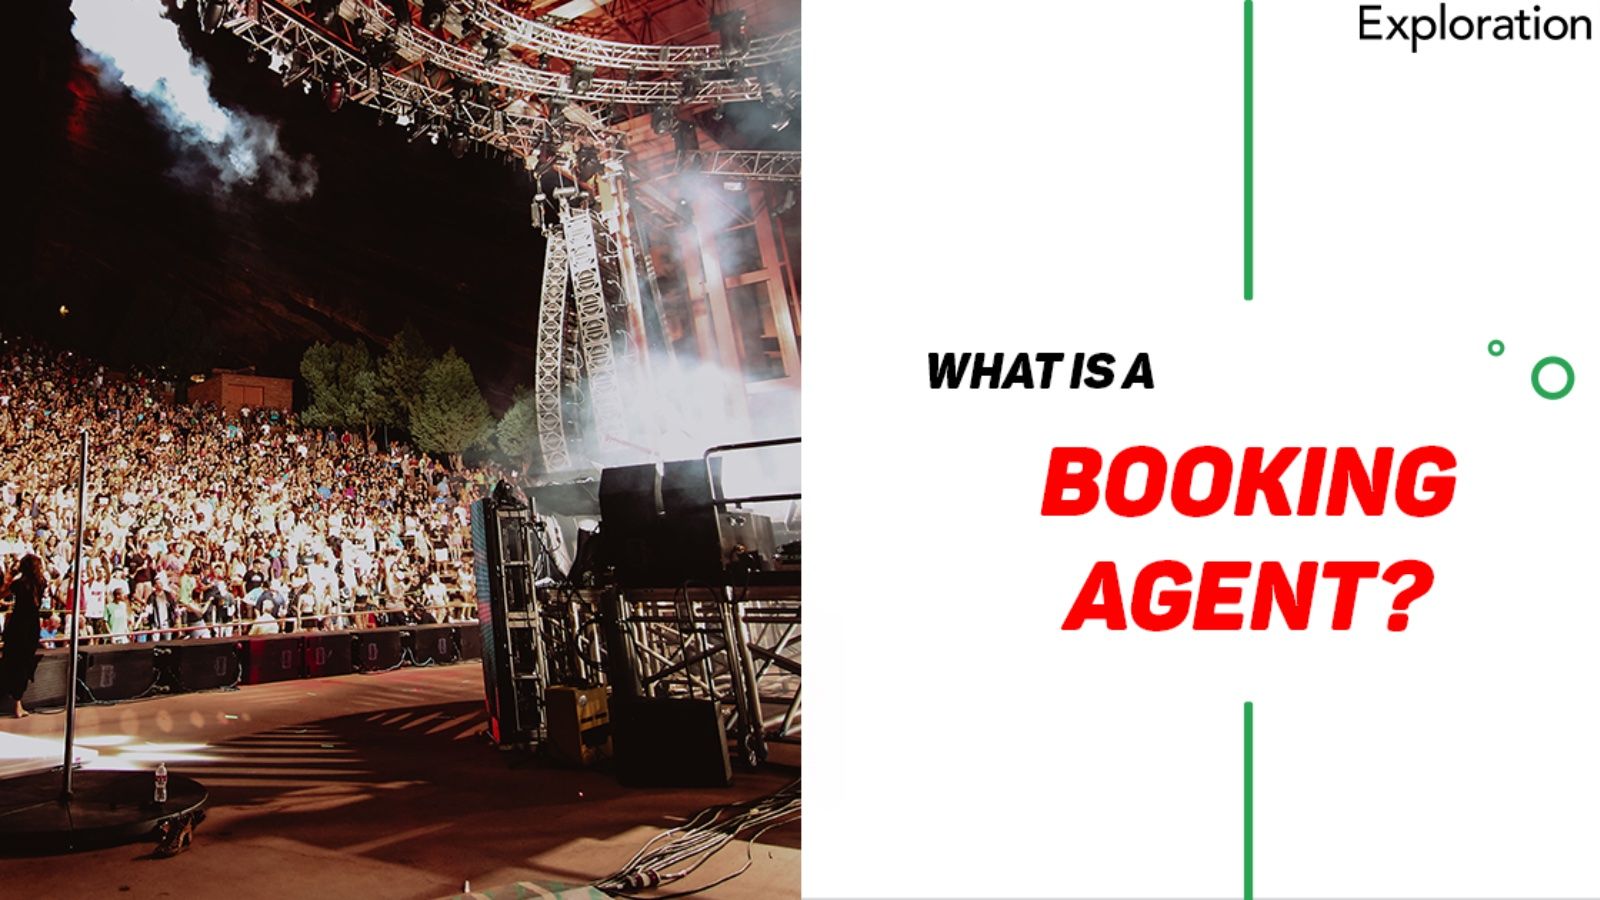 What is a Booking Agent?